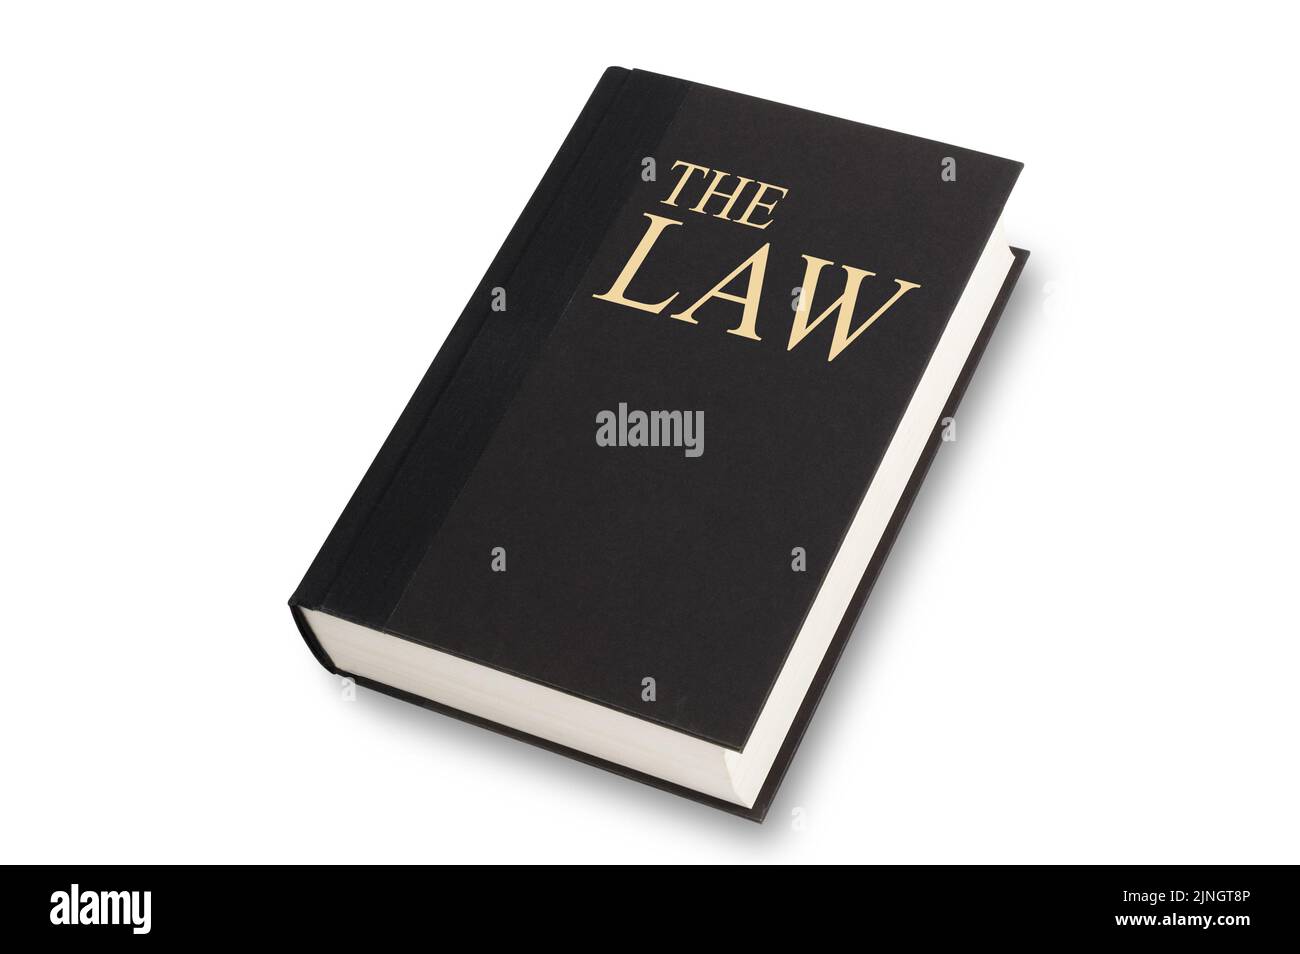 Black book with the words The Law title on front. Isolated on white with path Stock Photo